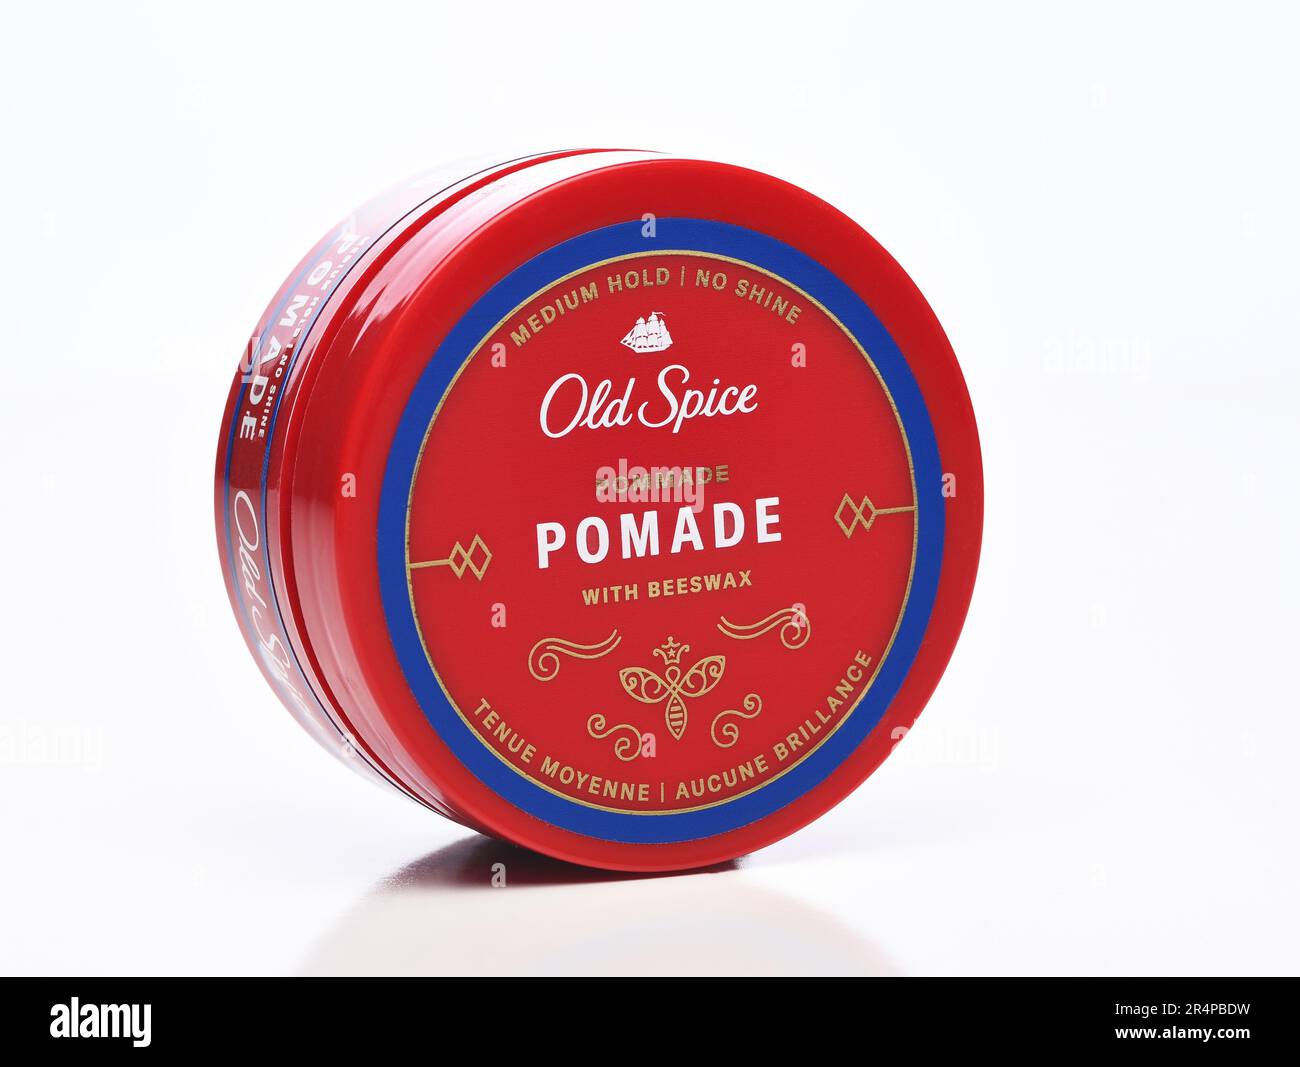 IRIVNE, CALIFORNIA - 29 MAY 20223: A jar of Old Spice Pomade with Beeswax. Stock Photo